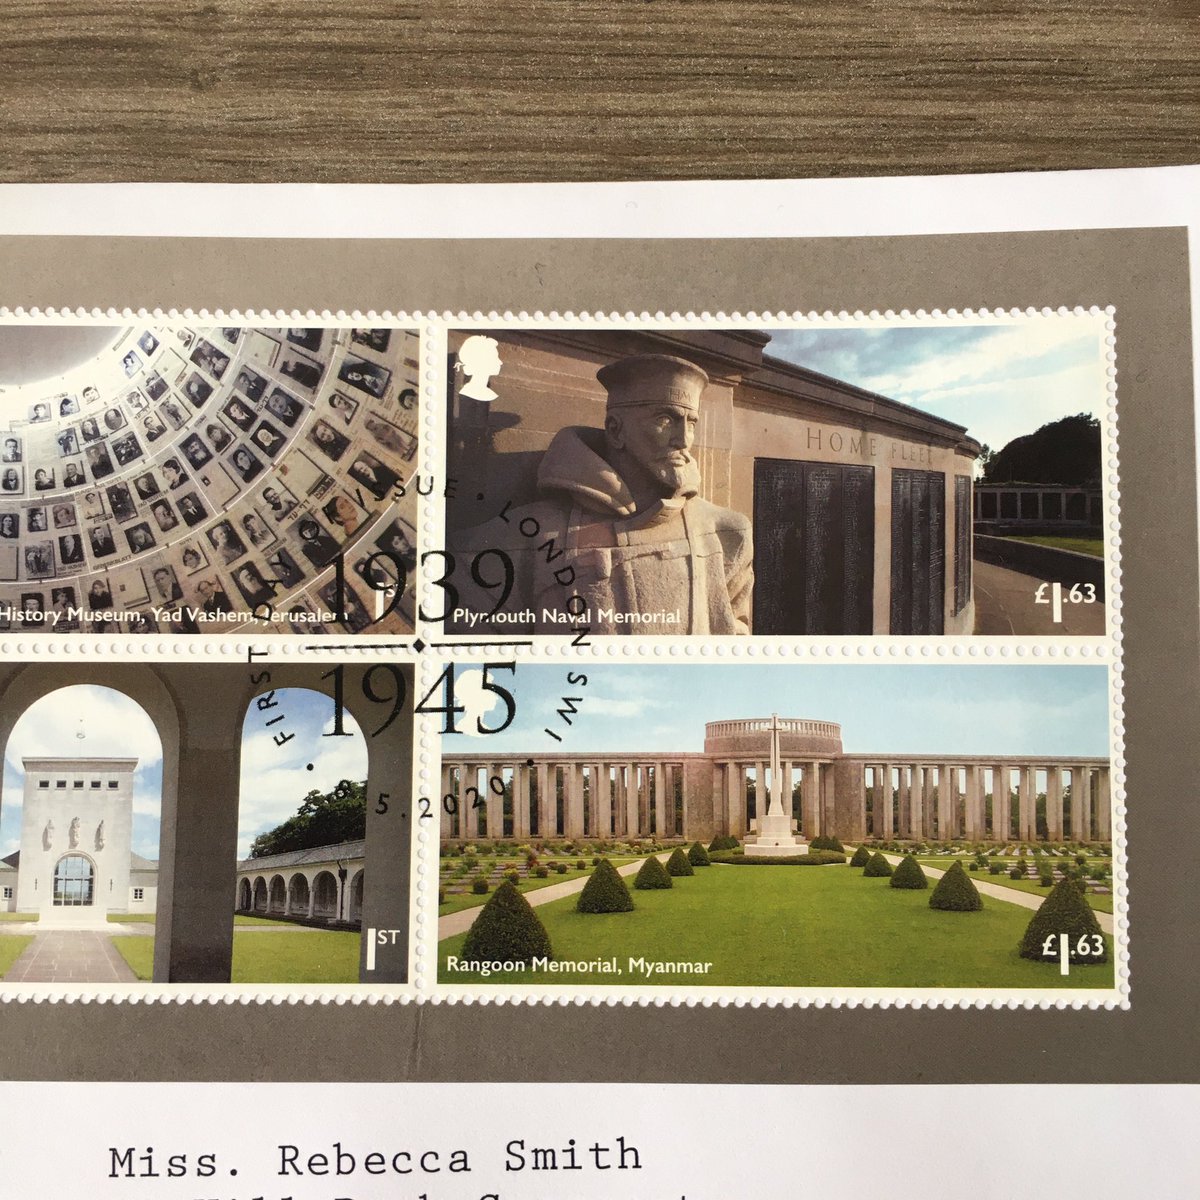 The inner geek in me ordered these @RoyalMailStamps First Day Cover stamps to mark #VEDay75 which arrived today. Not sure how many letters I’d get with the #Plymouth stamp otherwise! @CWGC #inremembrance